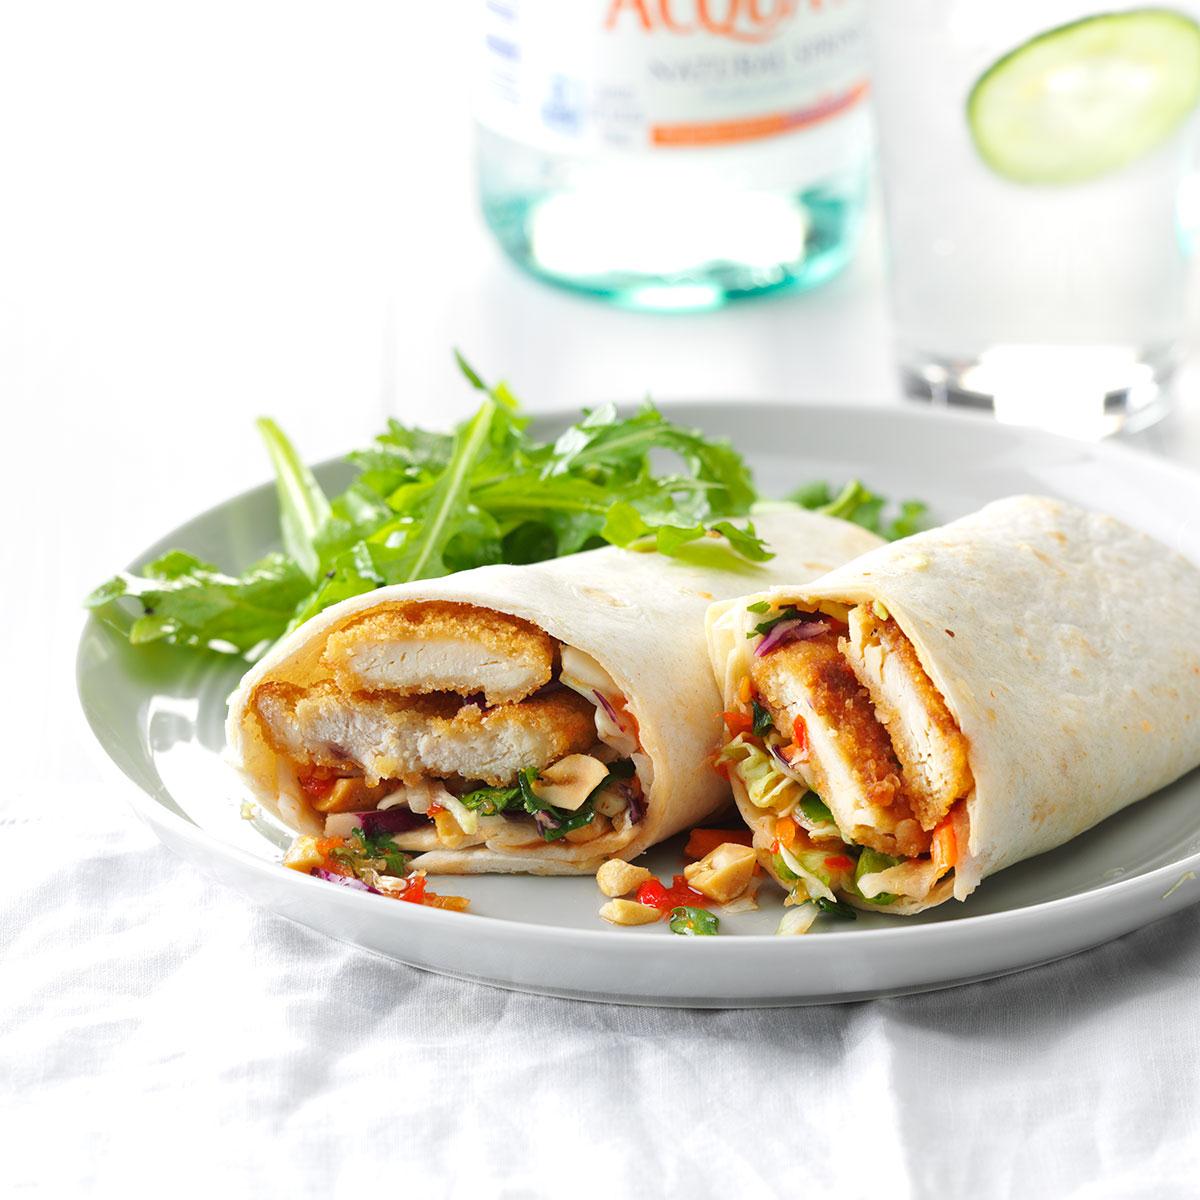 My kids love all kinds of wraps and Asian foods. This is an easy go-to in our house that works for everyone. —Mary Lou Timpson, Colorado City, Arizona <a href="https://www.tasteofhome.com/recipes/asian-chicken-crunch-wraps/">Get Recipe</a>